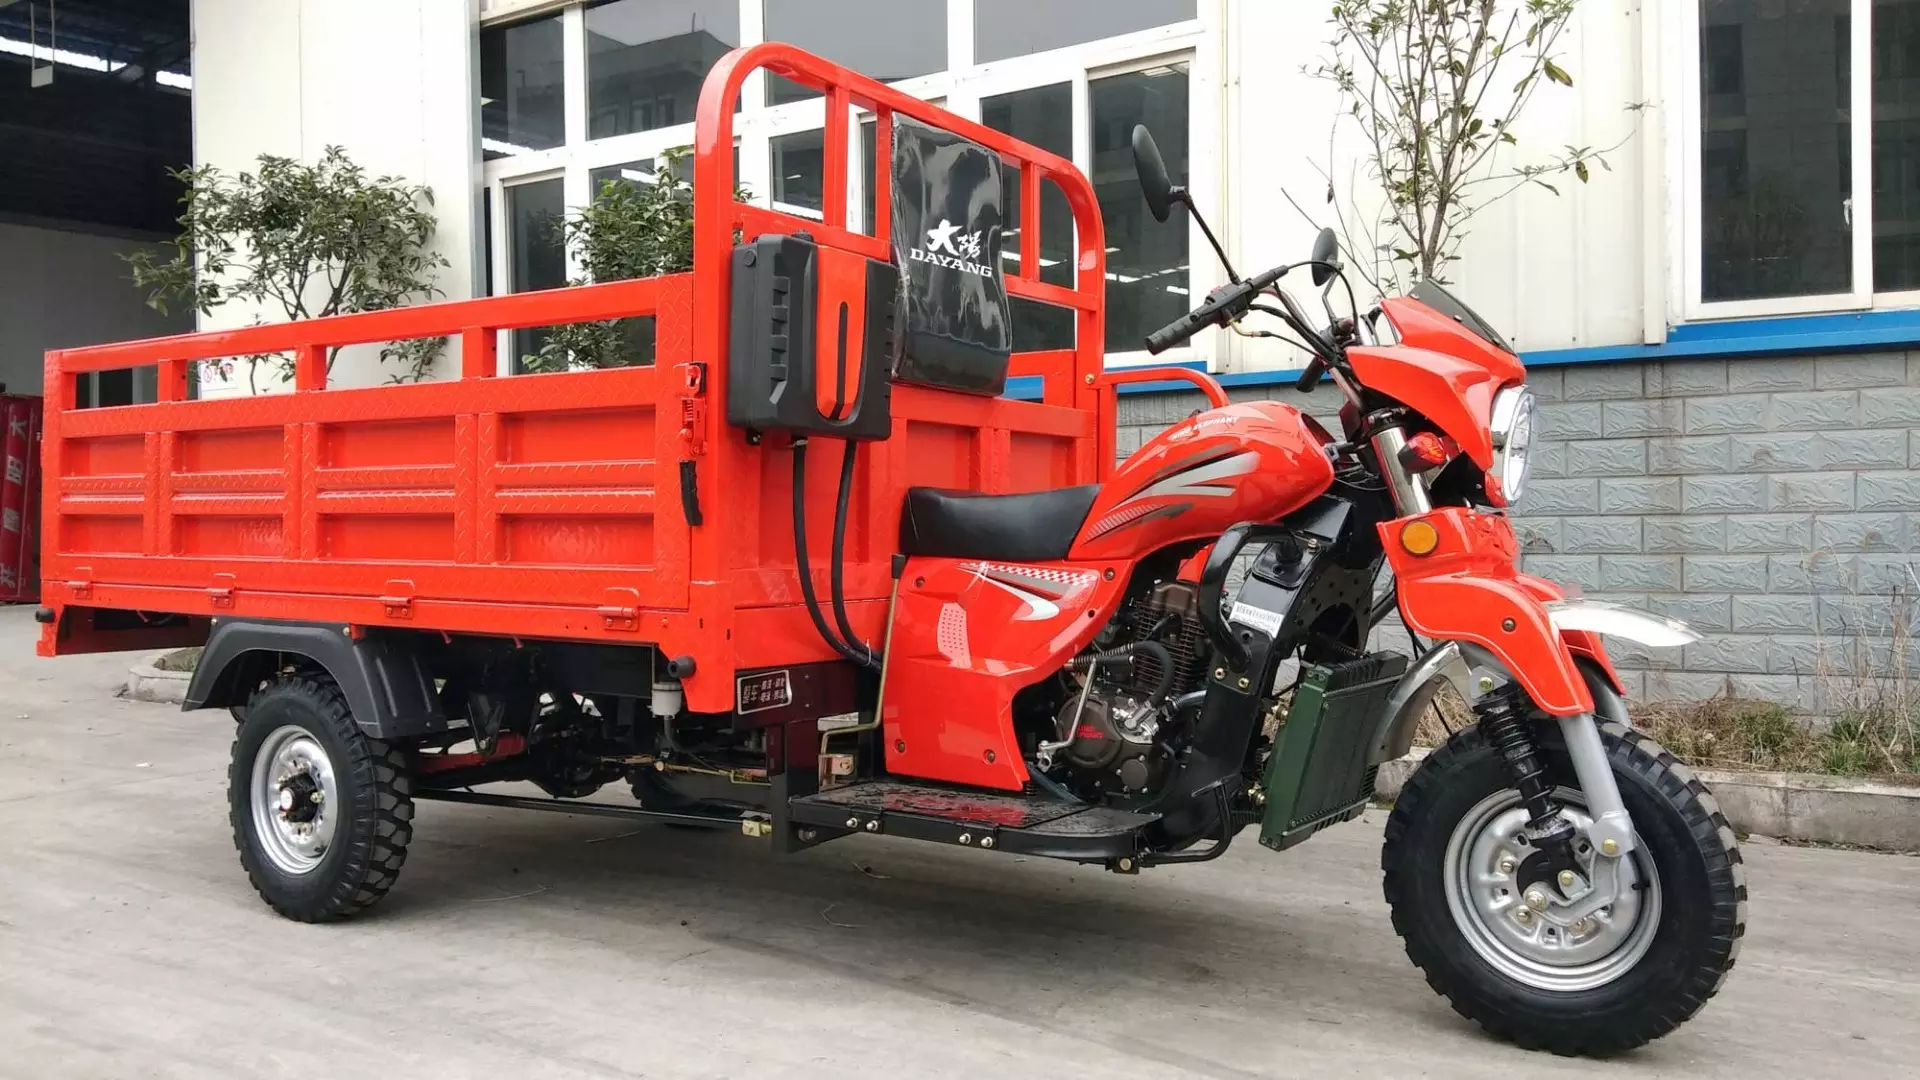 DAYANG brand new loncin engine new powerful 300cc water cooling customized gasoline cargo tricycle